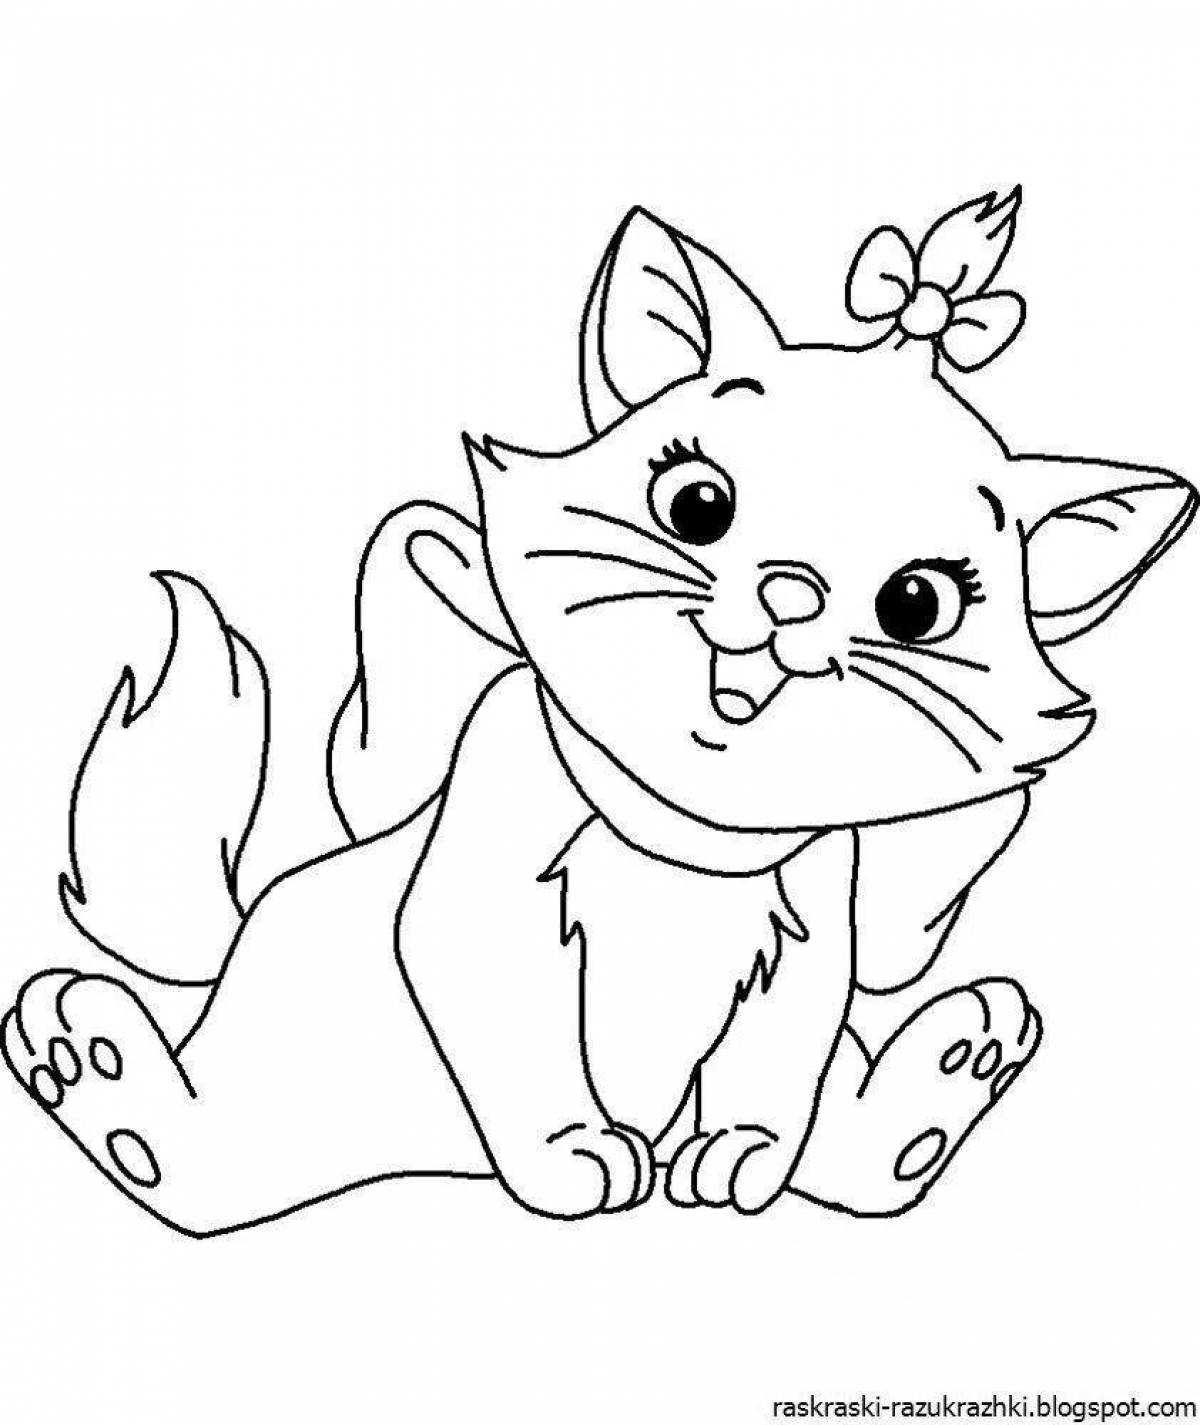 Soft coloring cat for children 4-5 years old